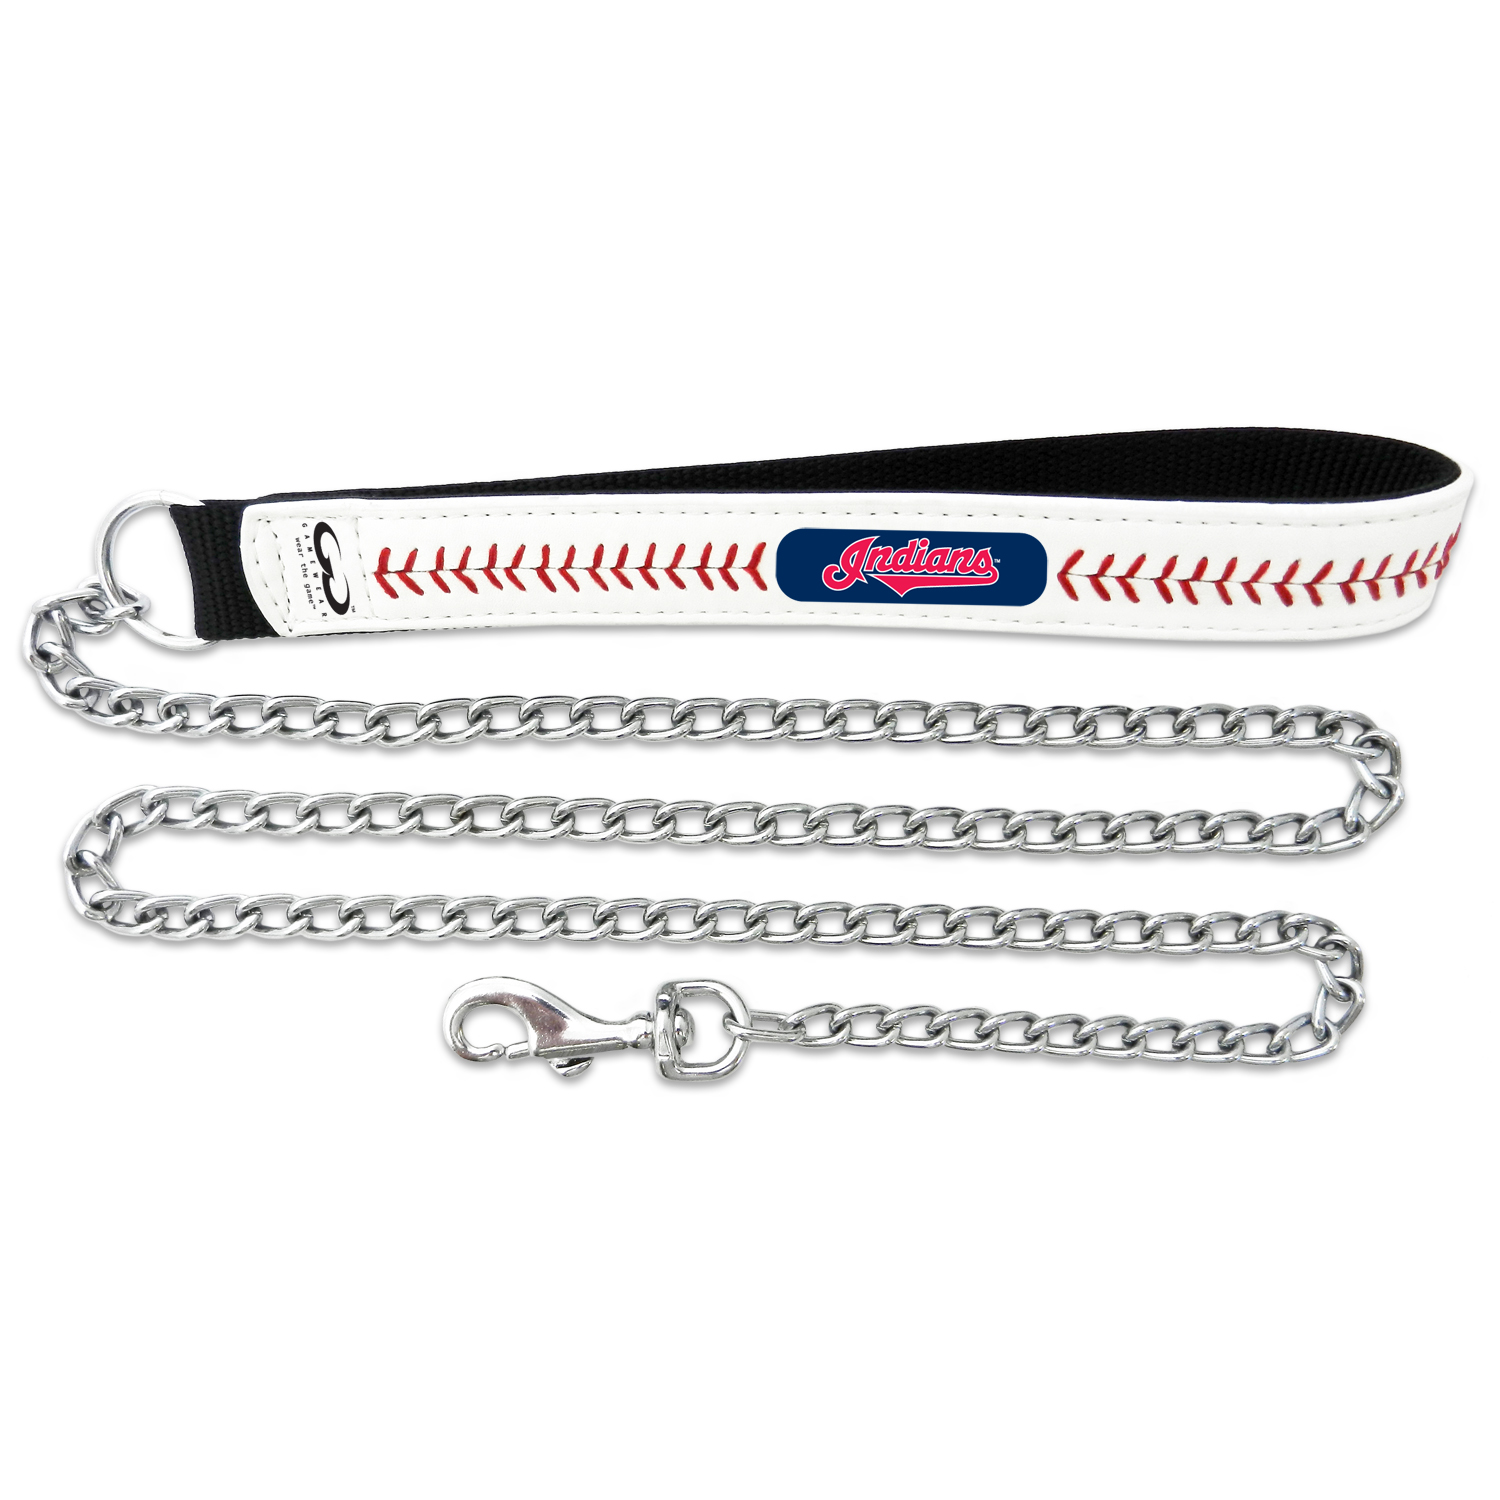 GAMEWEAR Cleveland Indians Baseball Leather Chain Leash